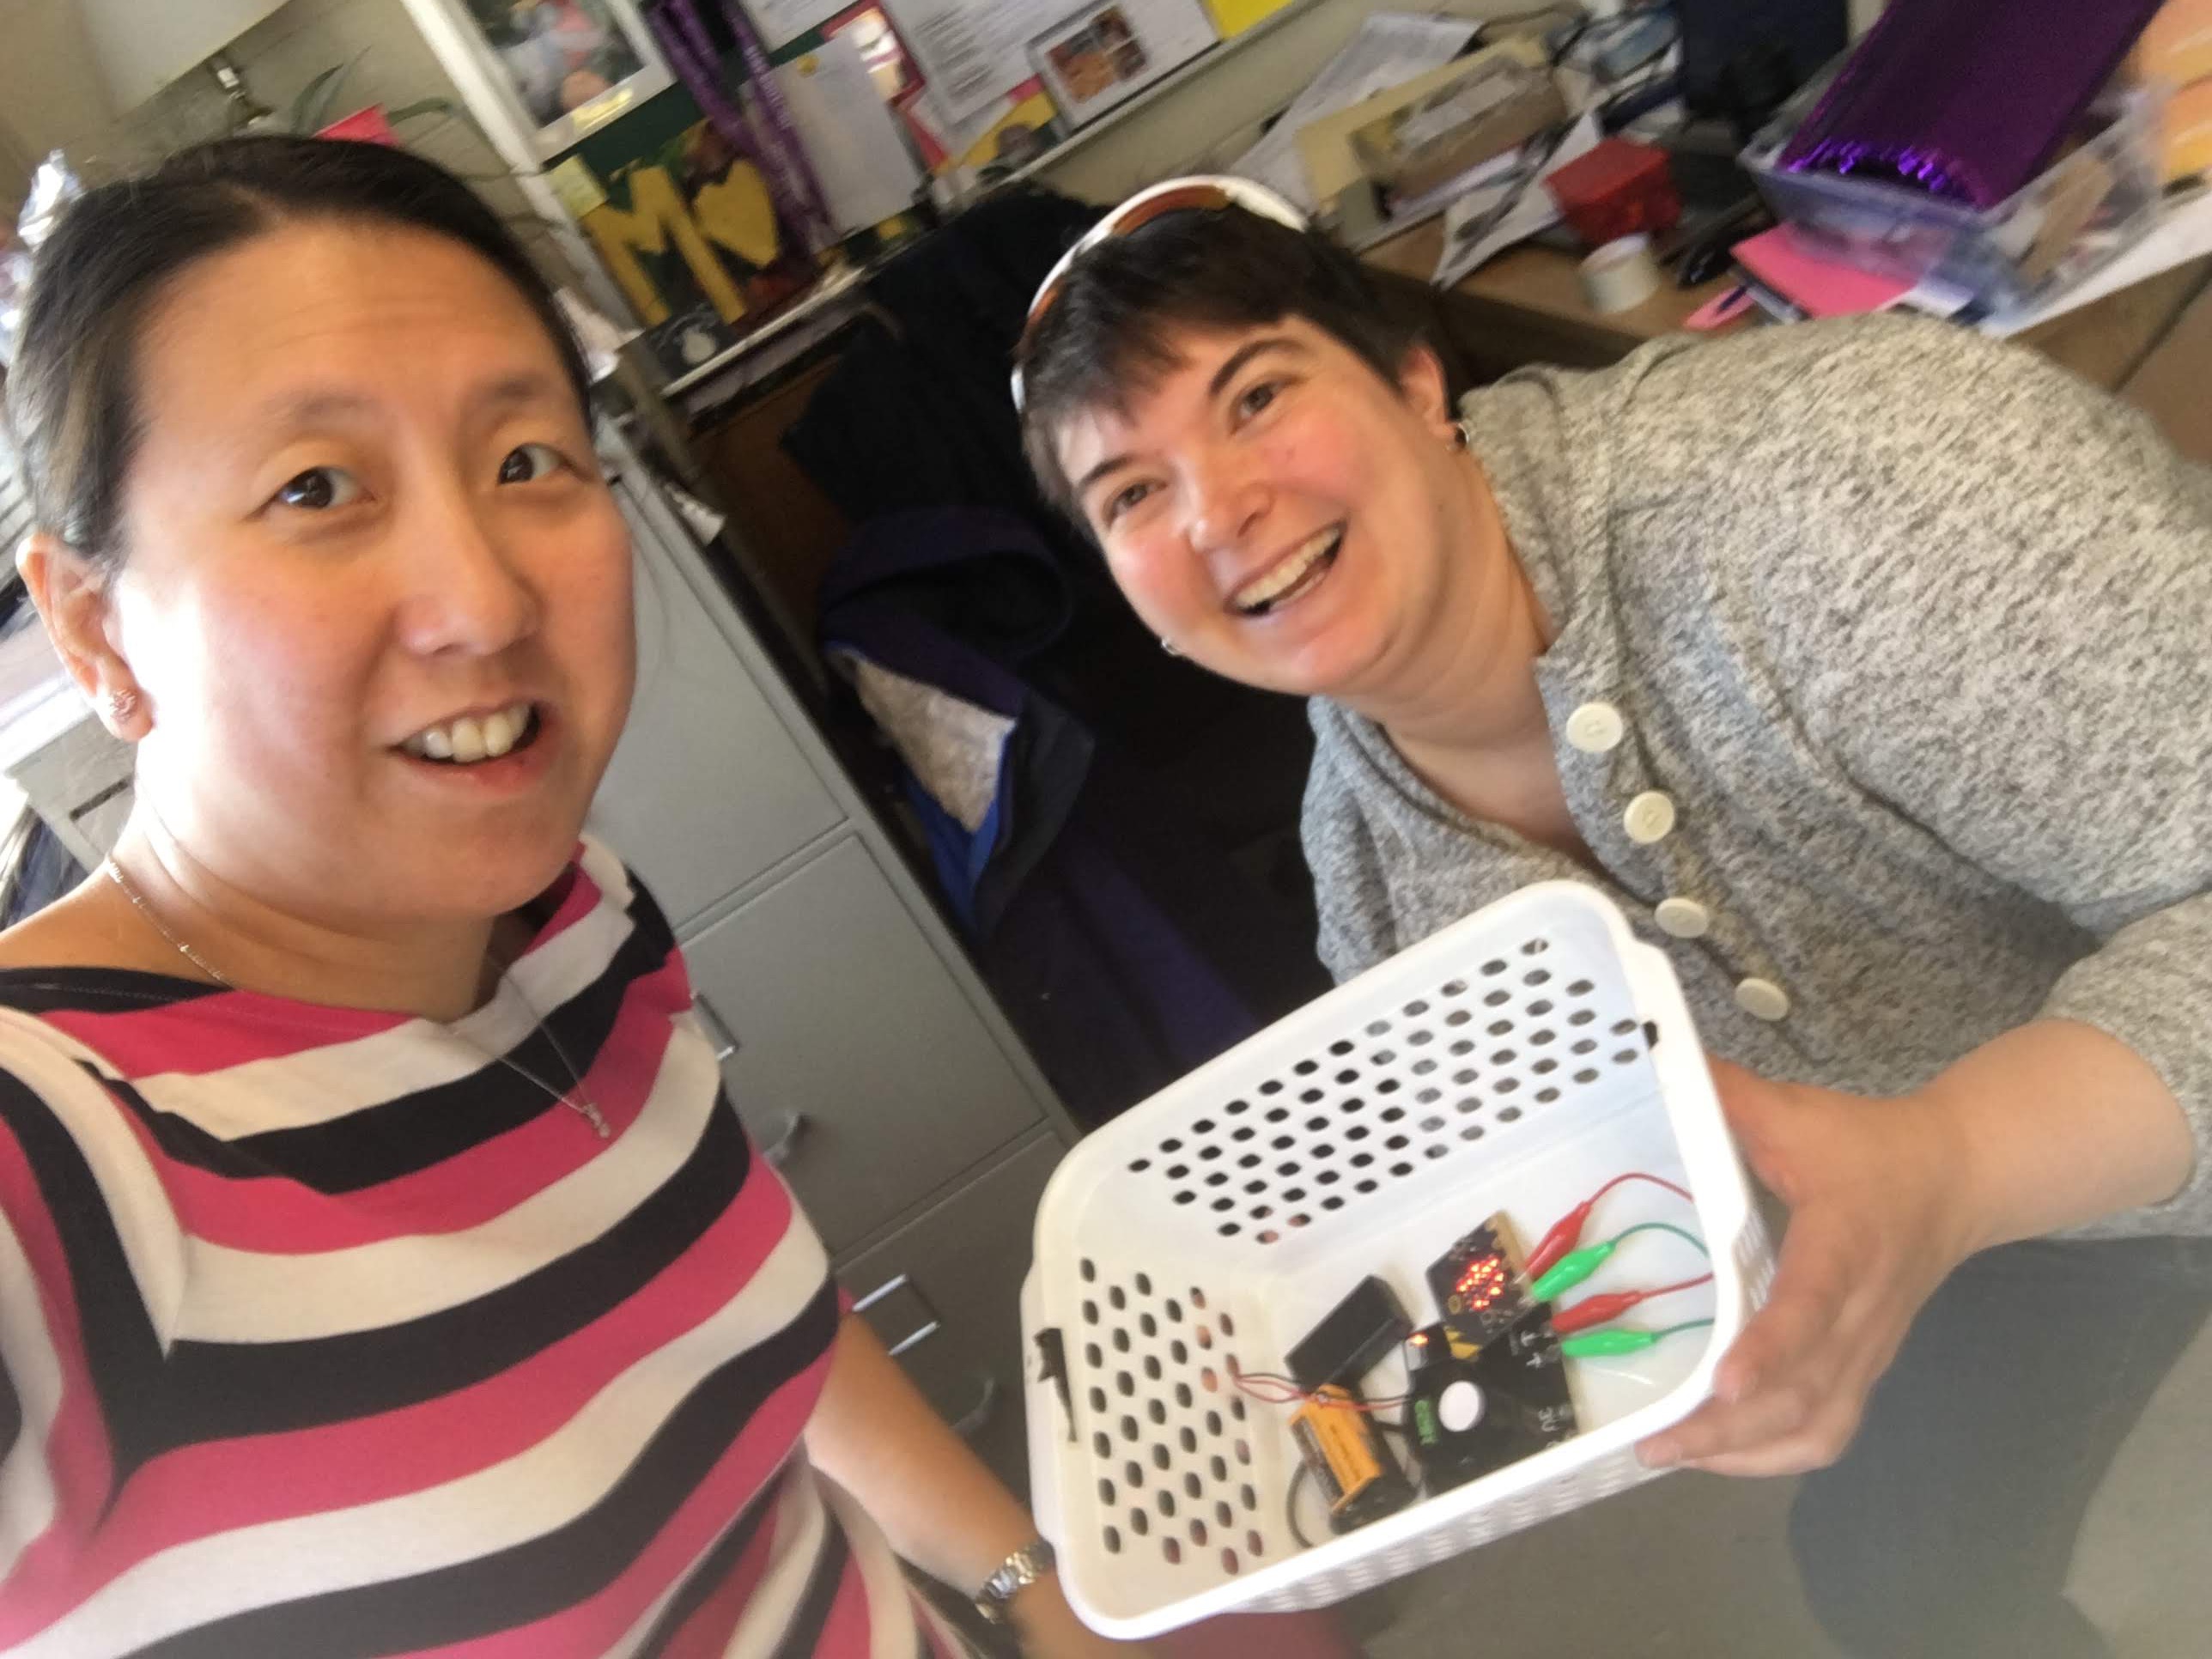 Winnie with co-worker Kendra showing their microbit creation